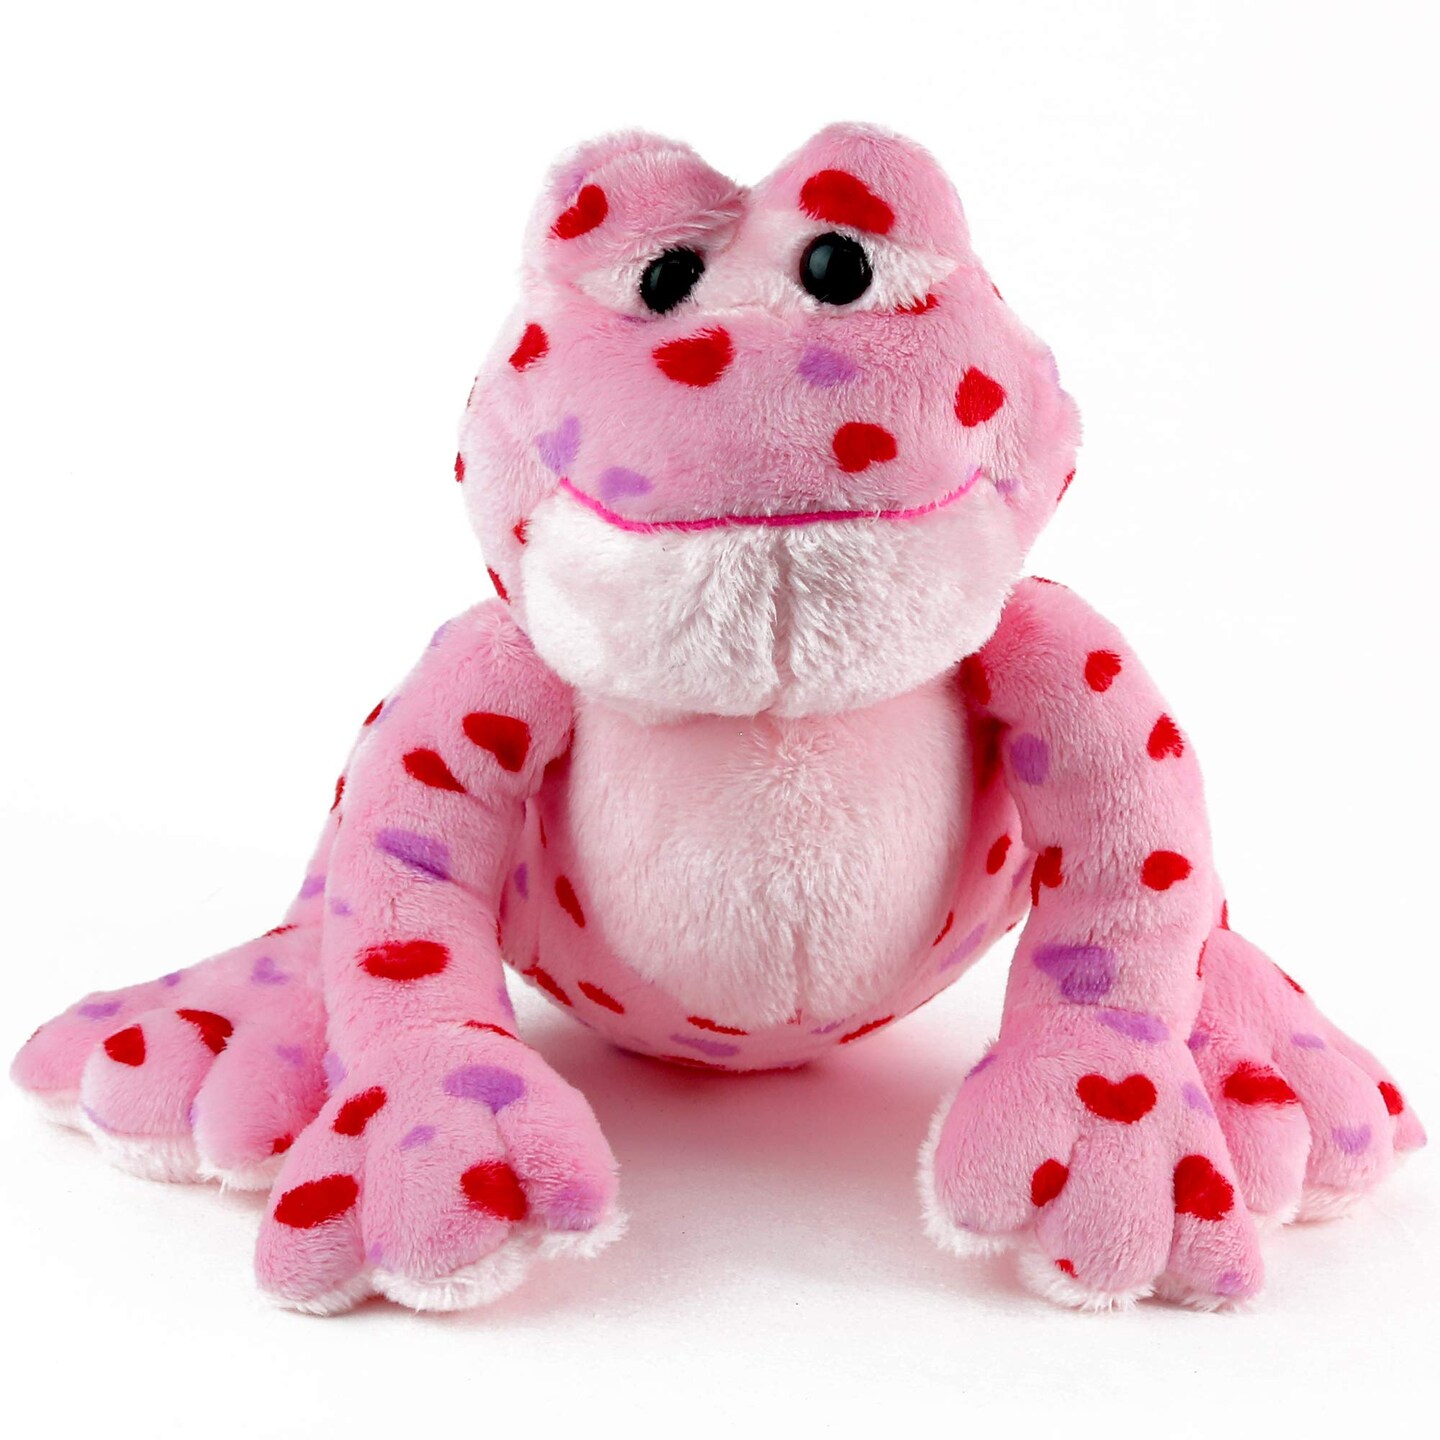 Big Mo&#x27;s Toys Love Frog - Plush Valentine&#x27;s Day Pink and Red Heart Printed Small Stuffed Frogs Animals for All Ages